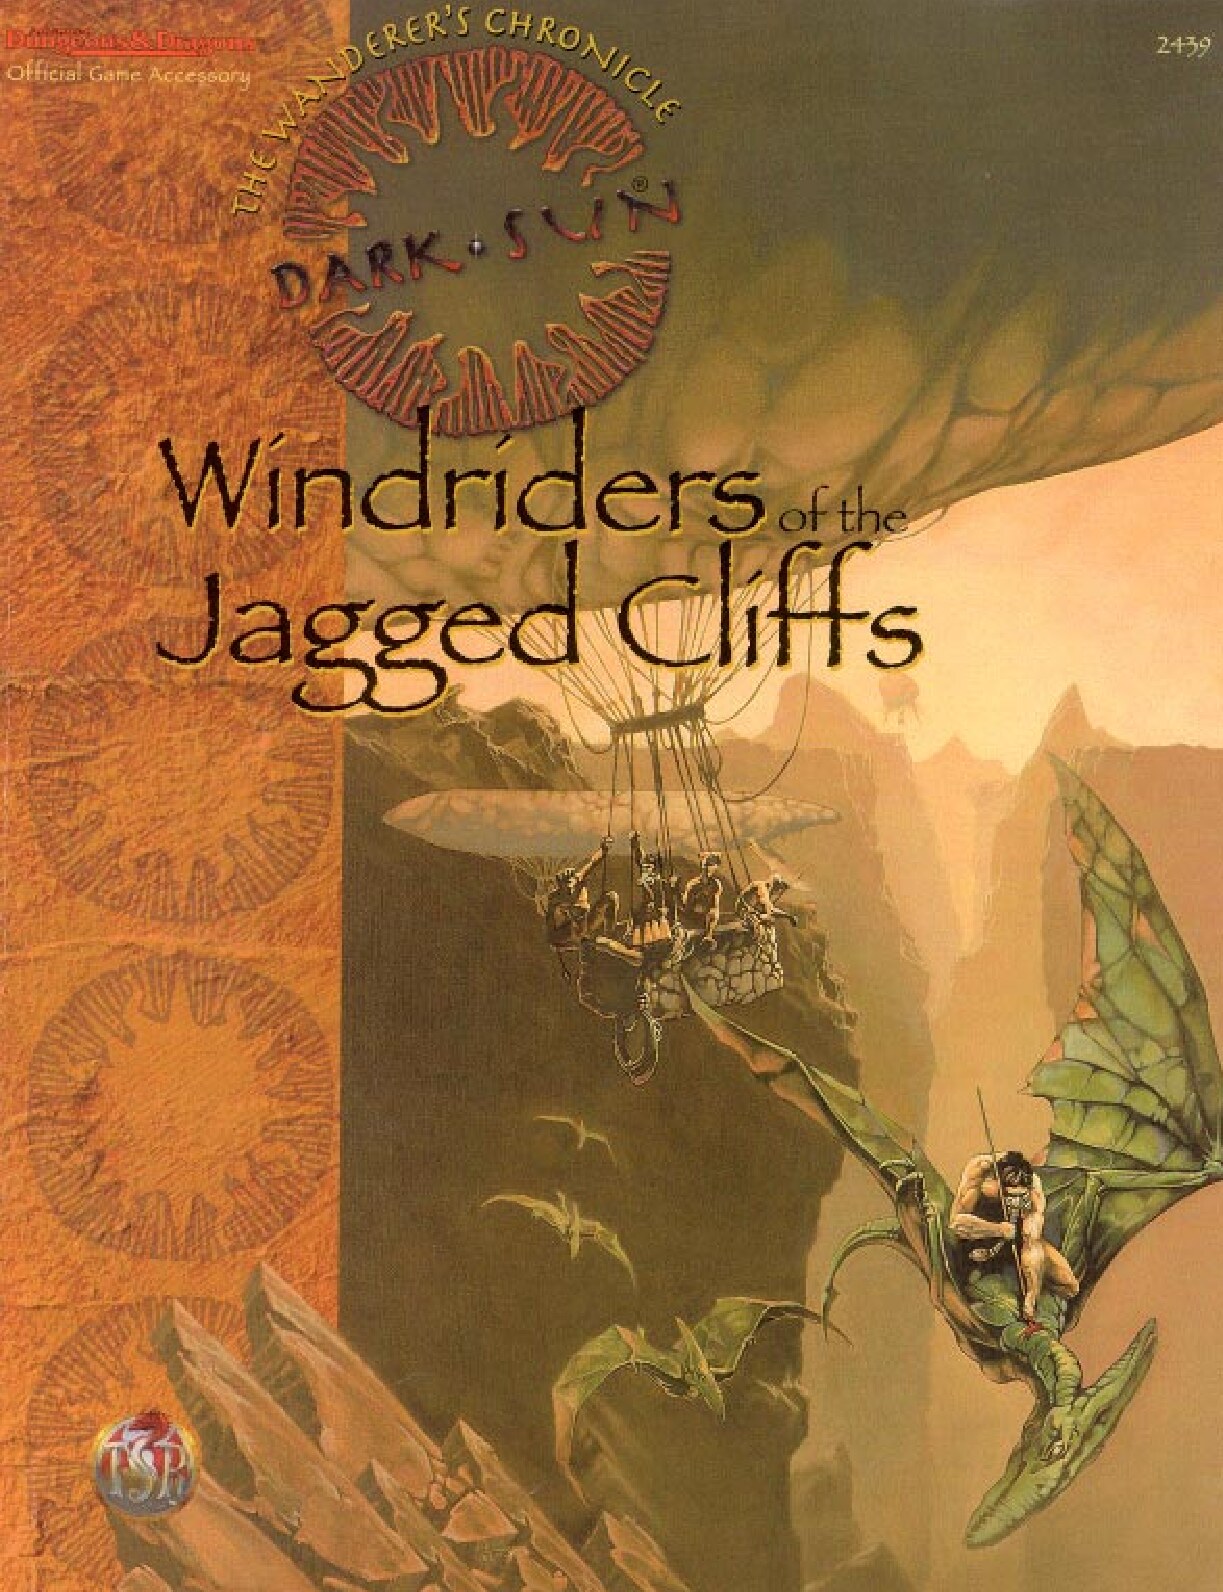 Windriders of the Jagged Cliffs